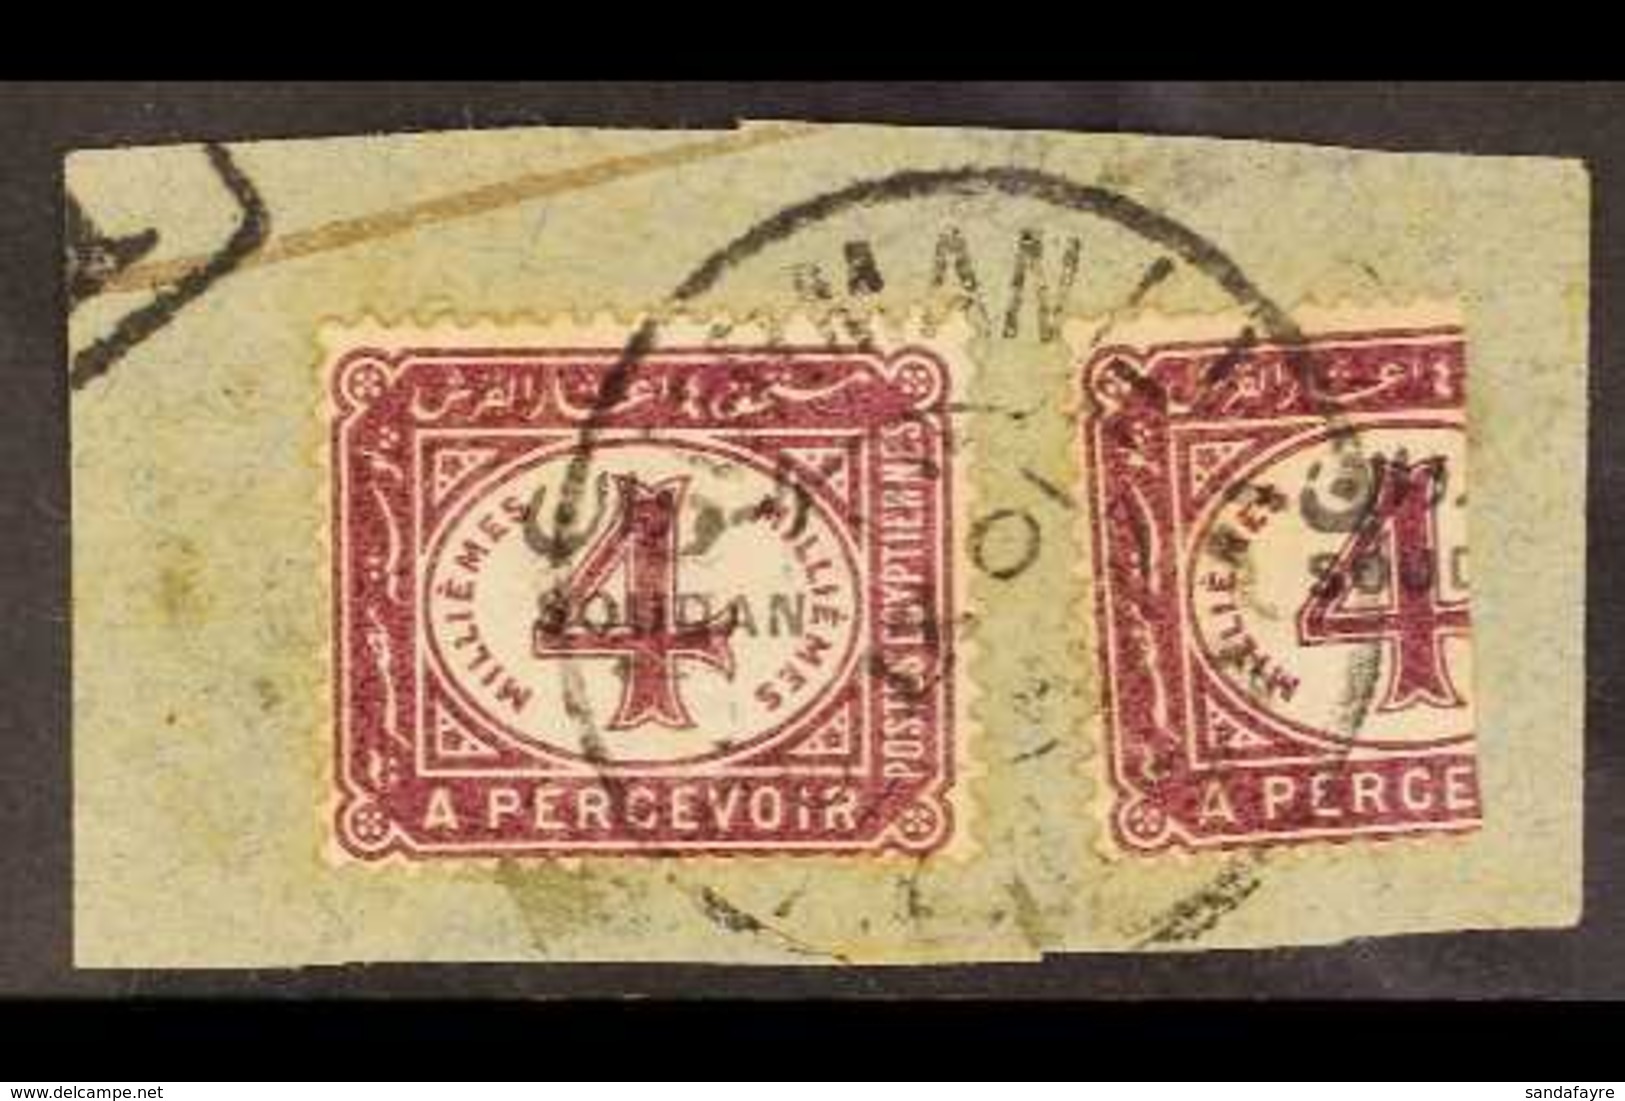 POSTAGE DUE  1897 4m Maroon BISECTED On Piece, SG D2a, Tied Omdurman Cds Of 6/9/01. Very Scarce, Some Minor Faults / Sta - Sudan (...-1951)